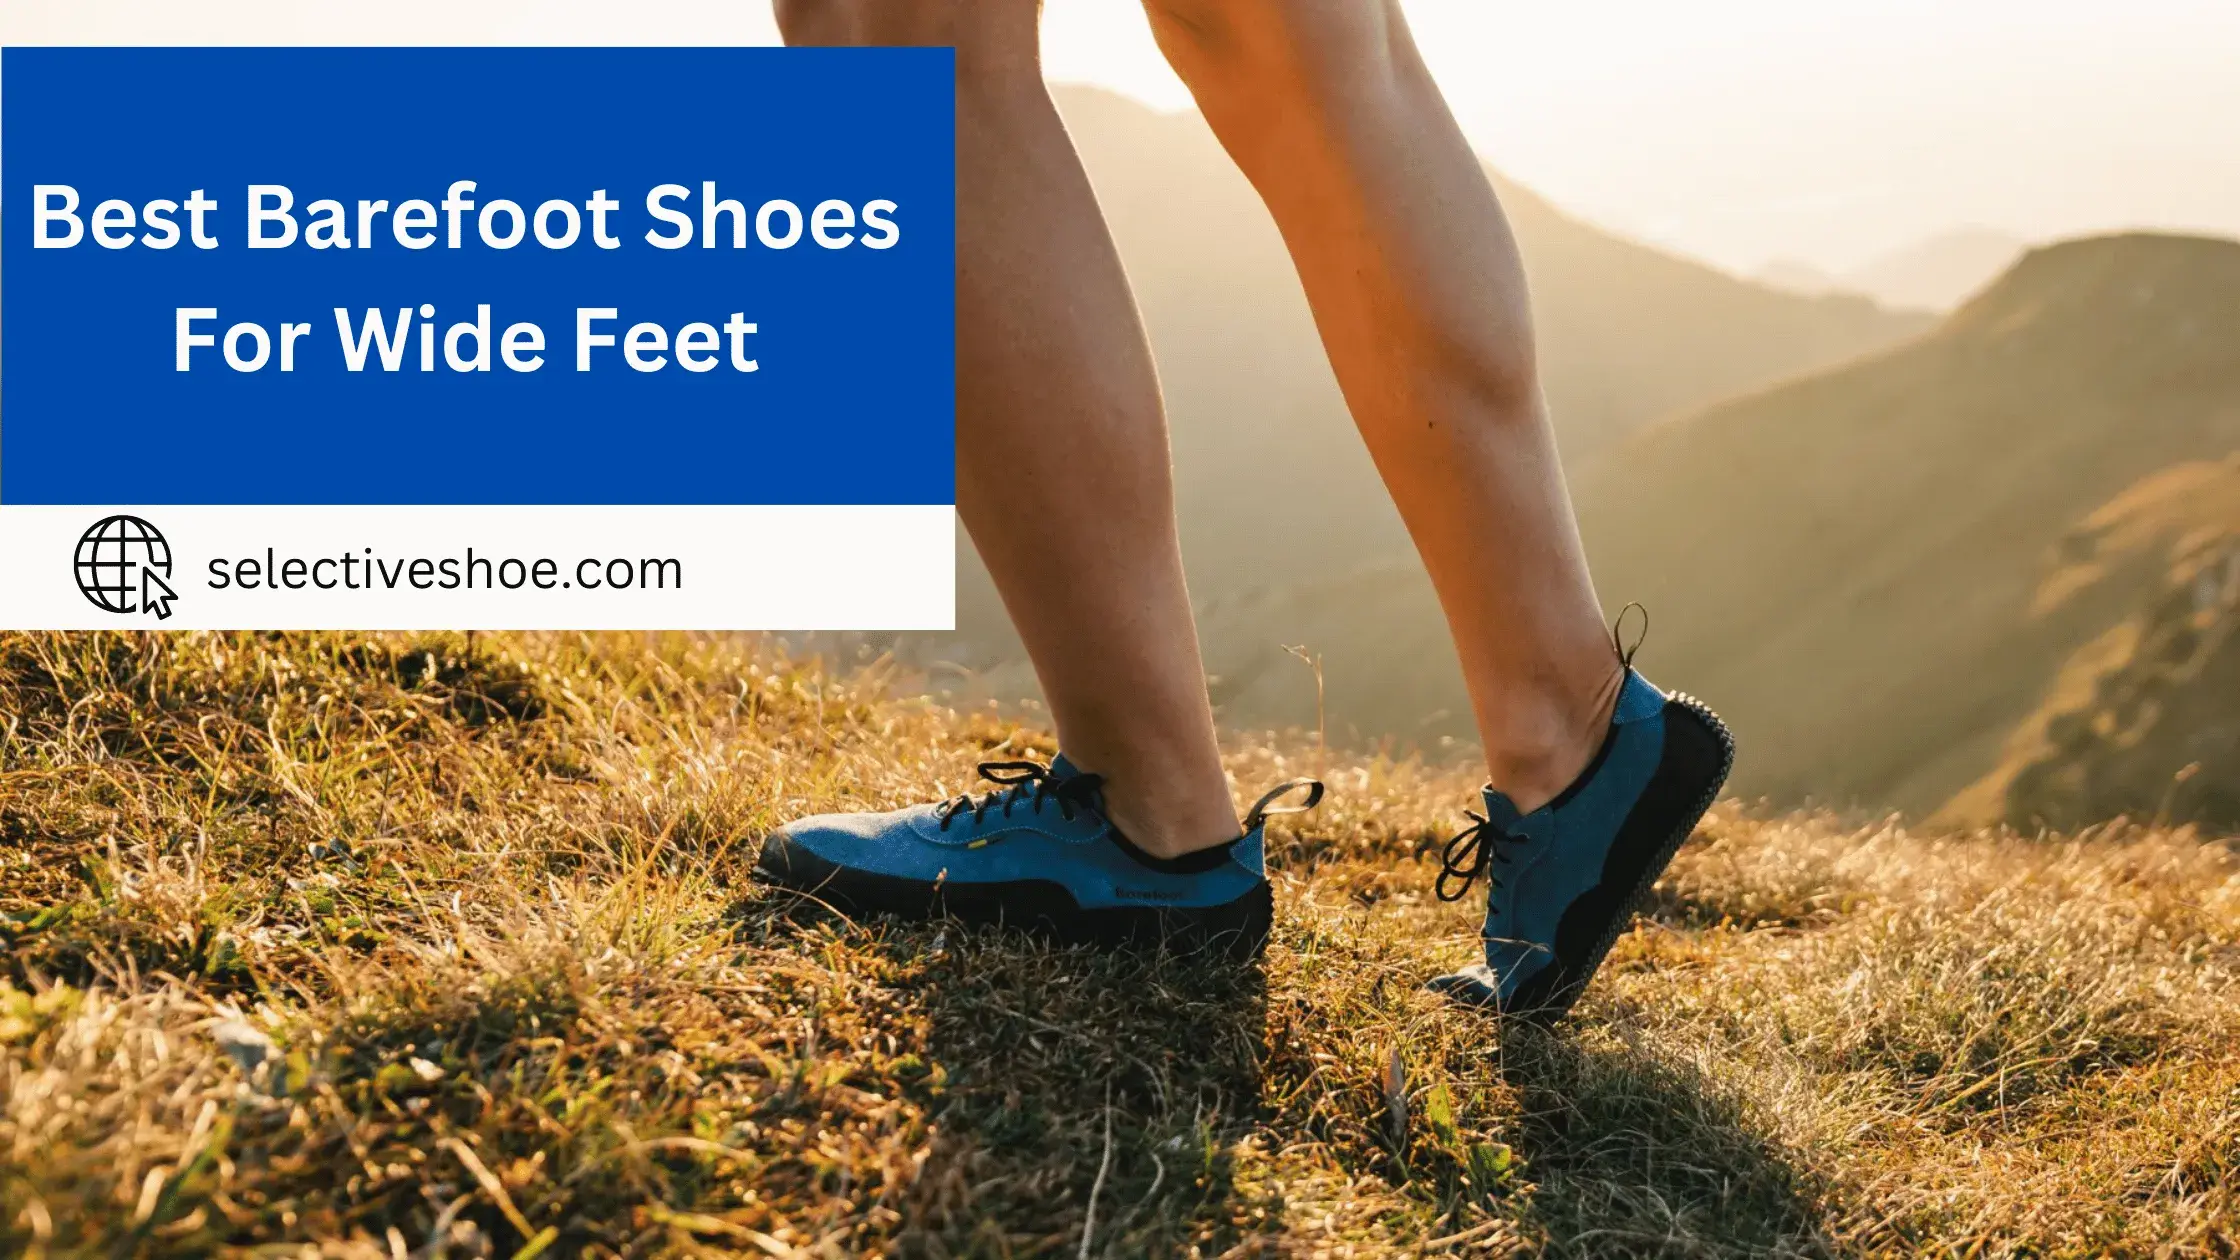 Best Barefoot Shoes For Wide Feet - (An In-Depth Guide)